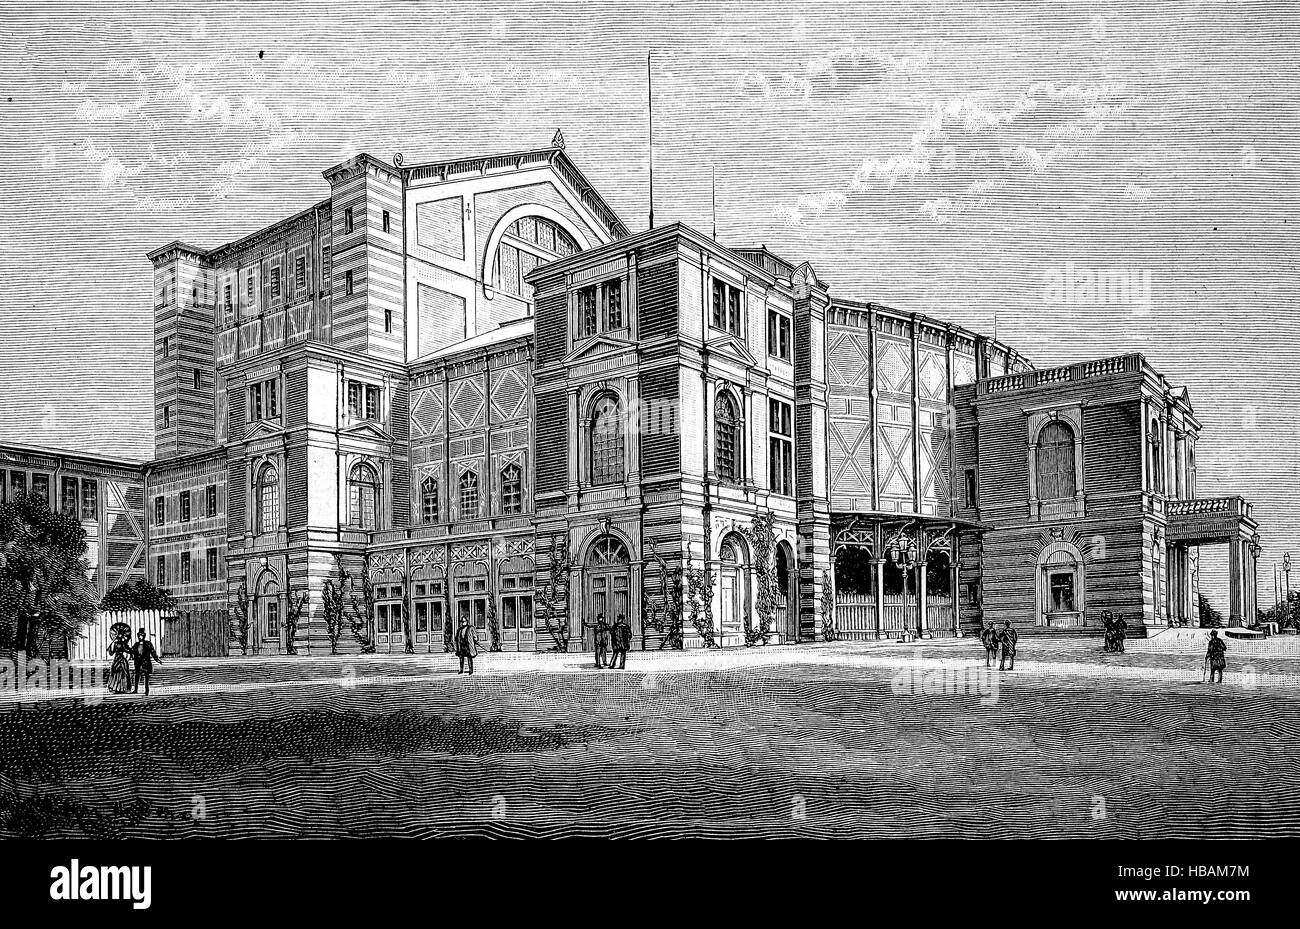 The Bayreuth Festspielhaus or Bayreuth Festival Theatre, or Richard Wagner Theatre, Bayreuth, Bavaria, Germany, hictorical illustration from 1880 Stock Photo